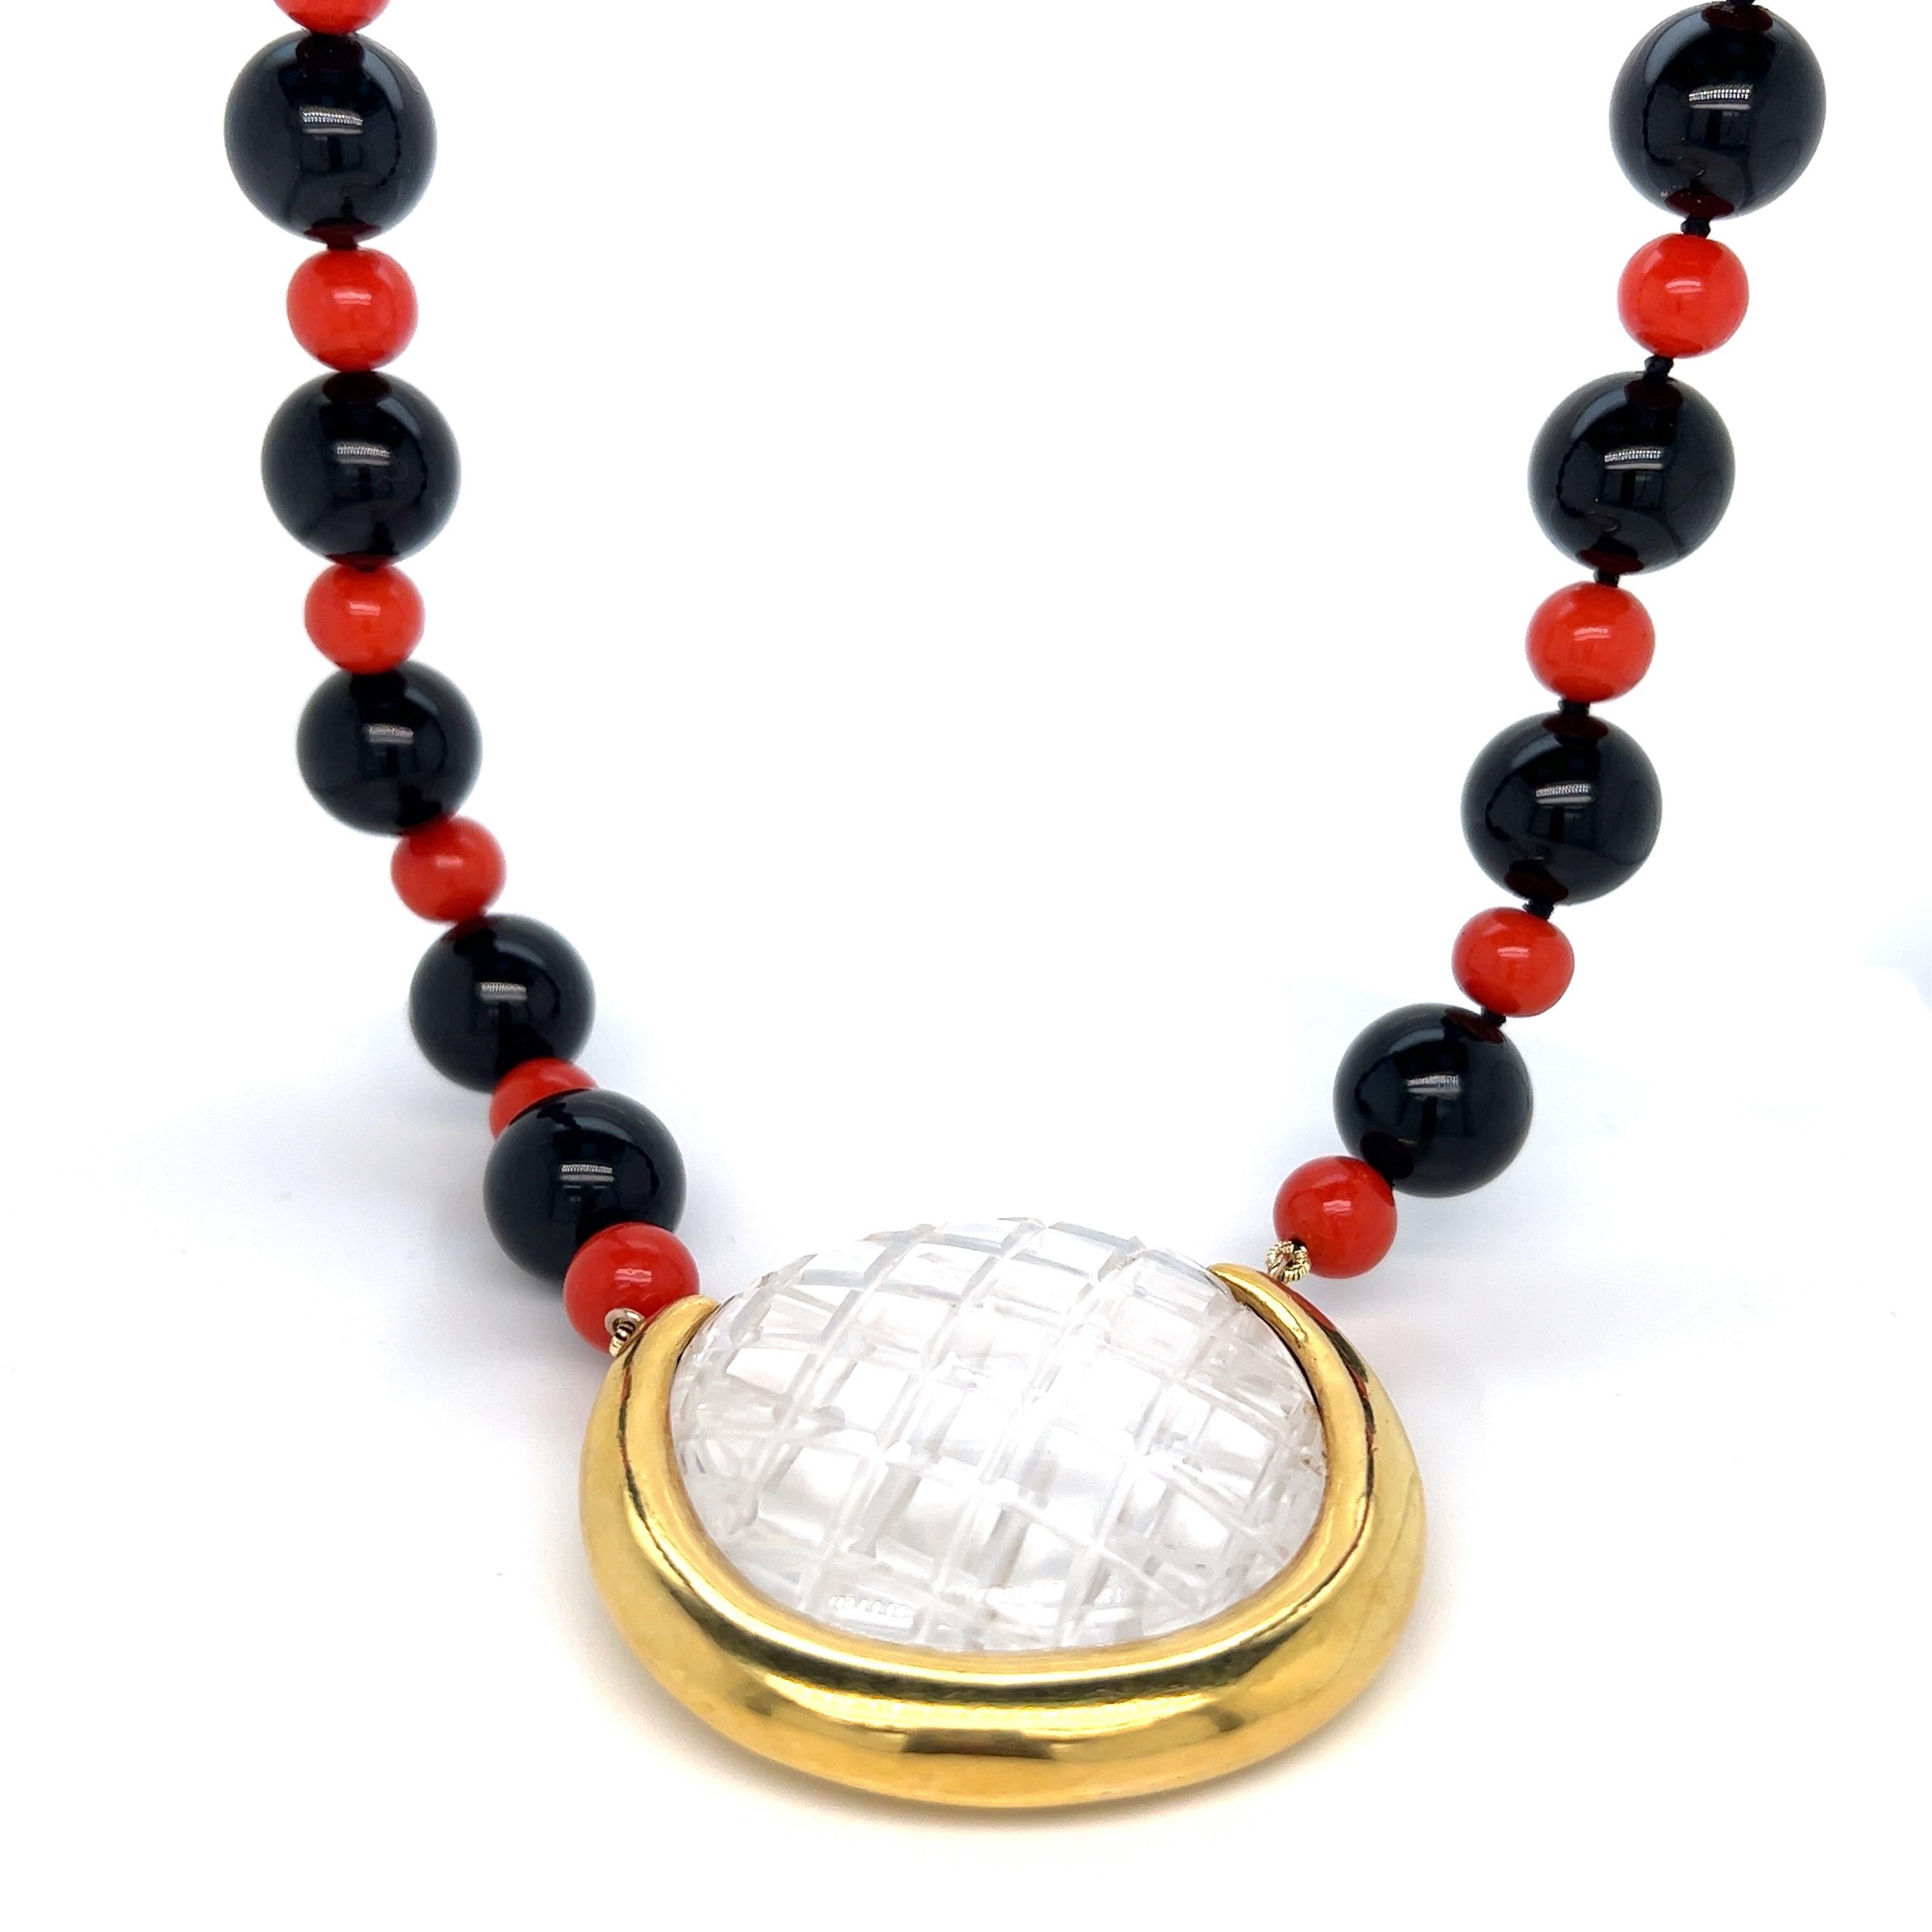 Aldo Cipullo 18 karat yellow gold crystal pendant beaded necklace. Its beads are made out of an extra long alternating black onyx (1.2 cm) and smaller corals (0.8 cm). The crystal features a criss cross pattern and is surrounded by gold on the sides